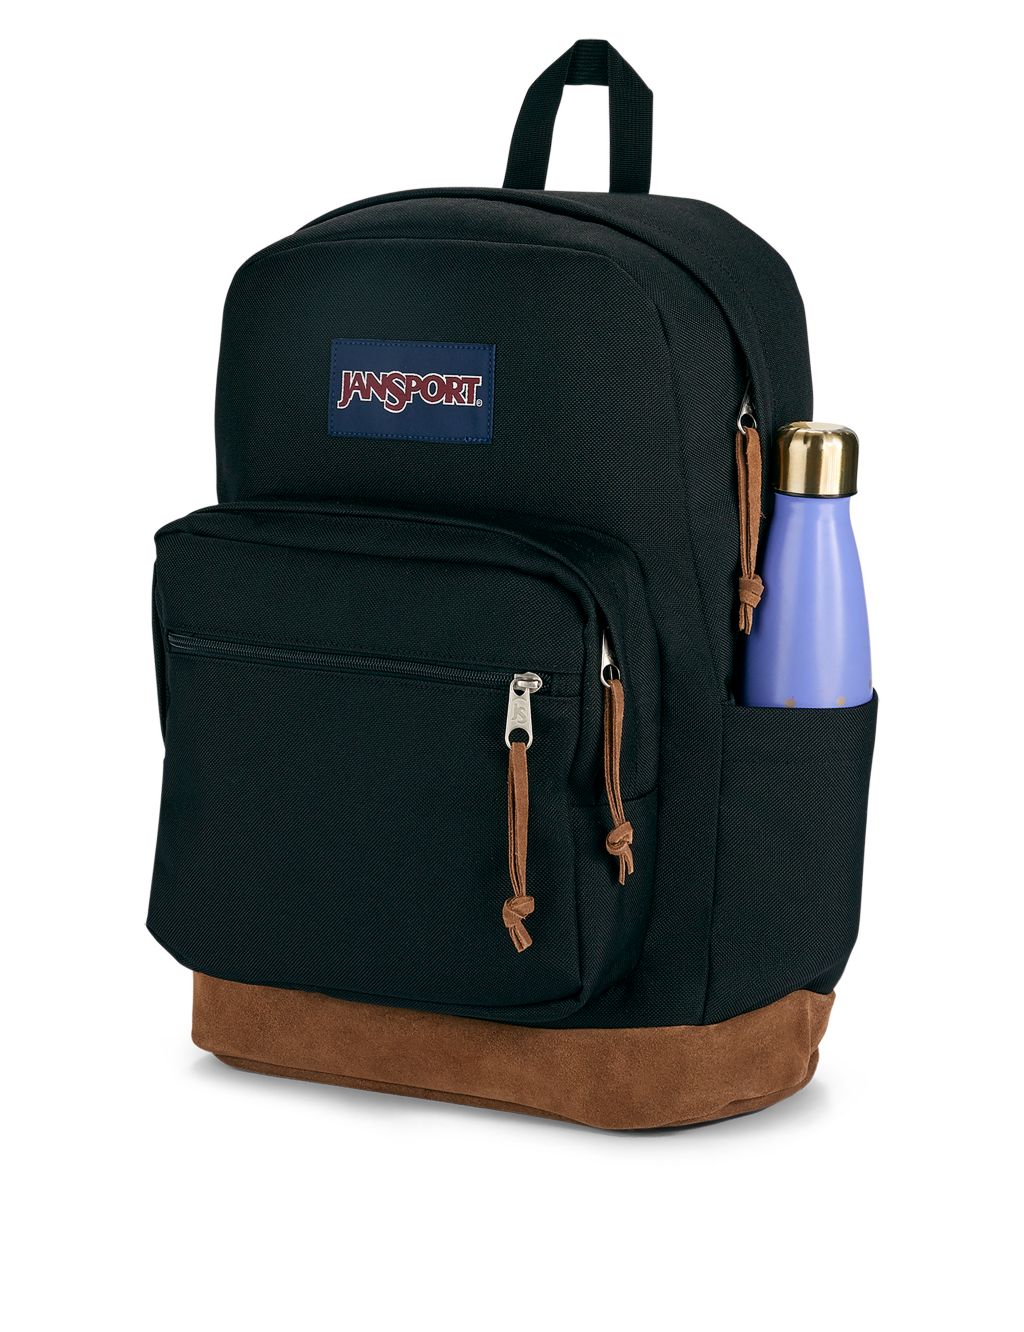 Right Pack Backpack image 3